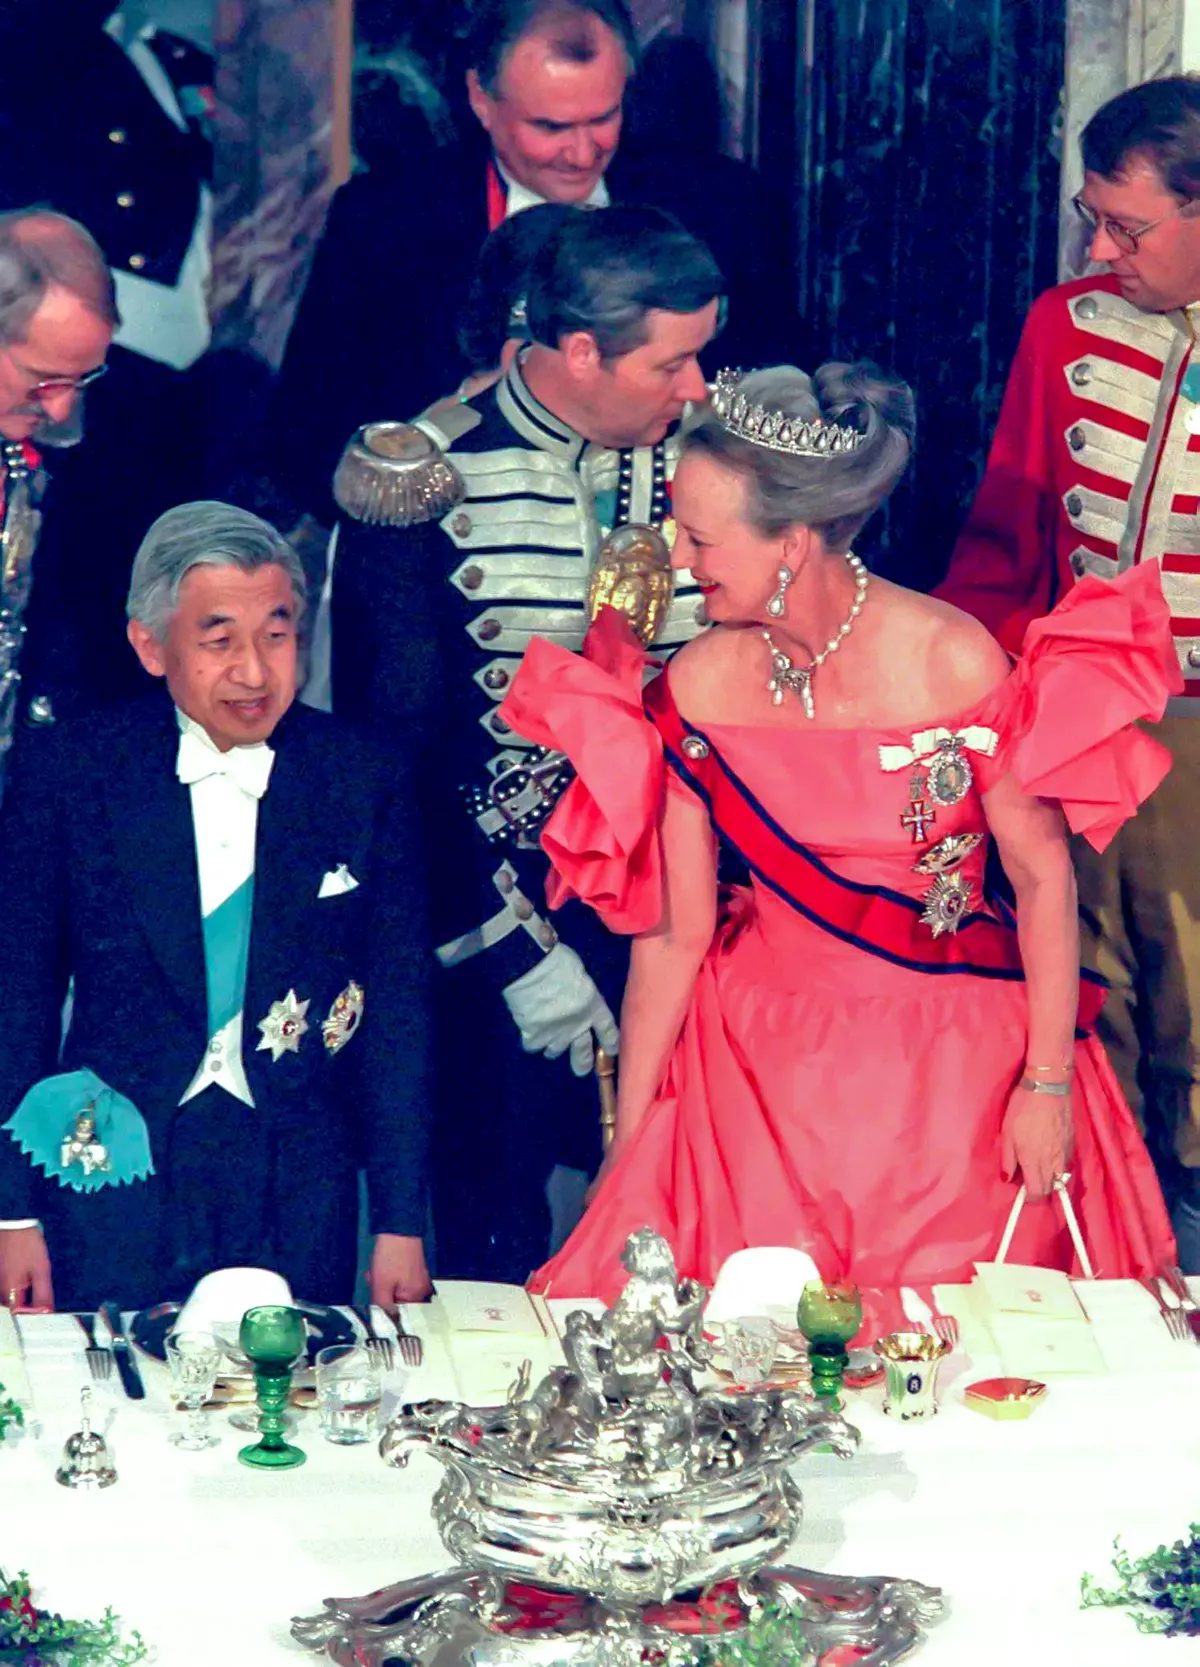 Photographed in her Jørgen Bender gown during the state visit of Emperor Akihito and Empress Michiko of Japan to Denmark, on 2 June 1998 in Fredensborg, Denmark.